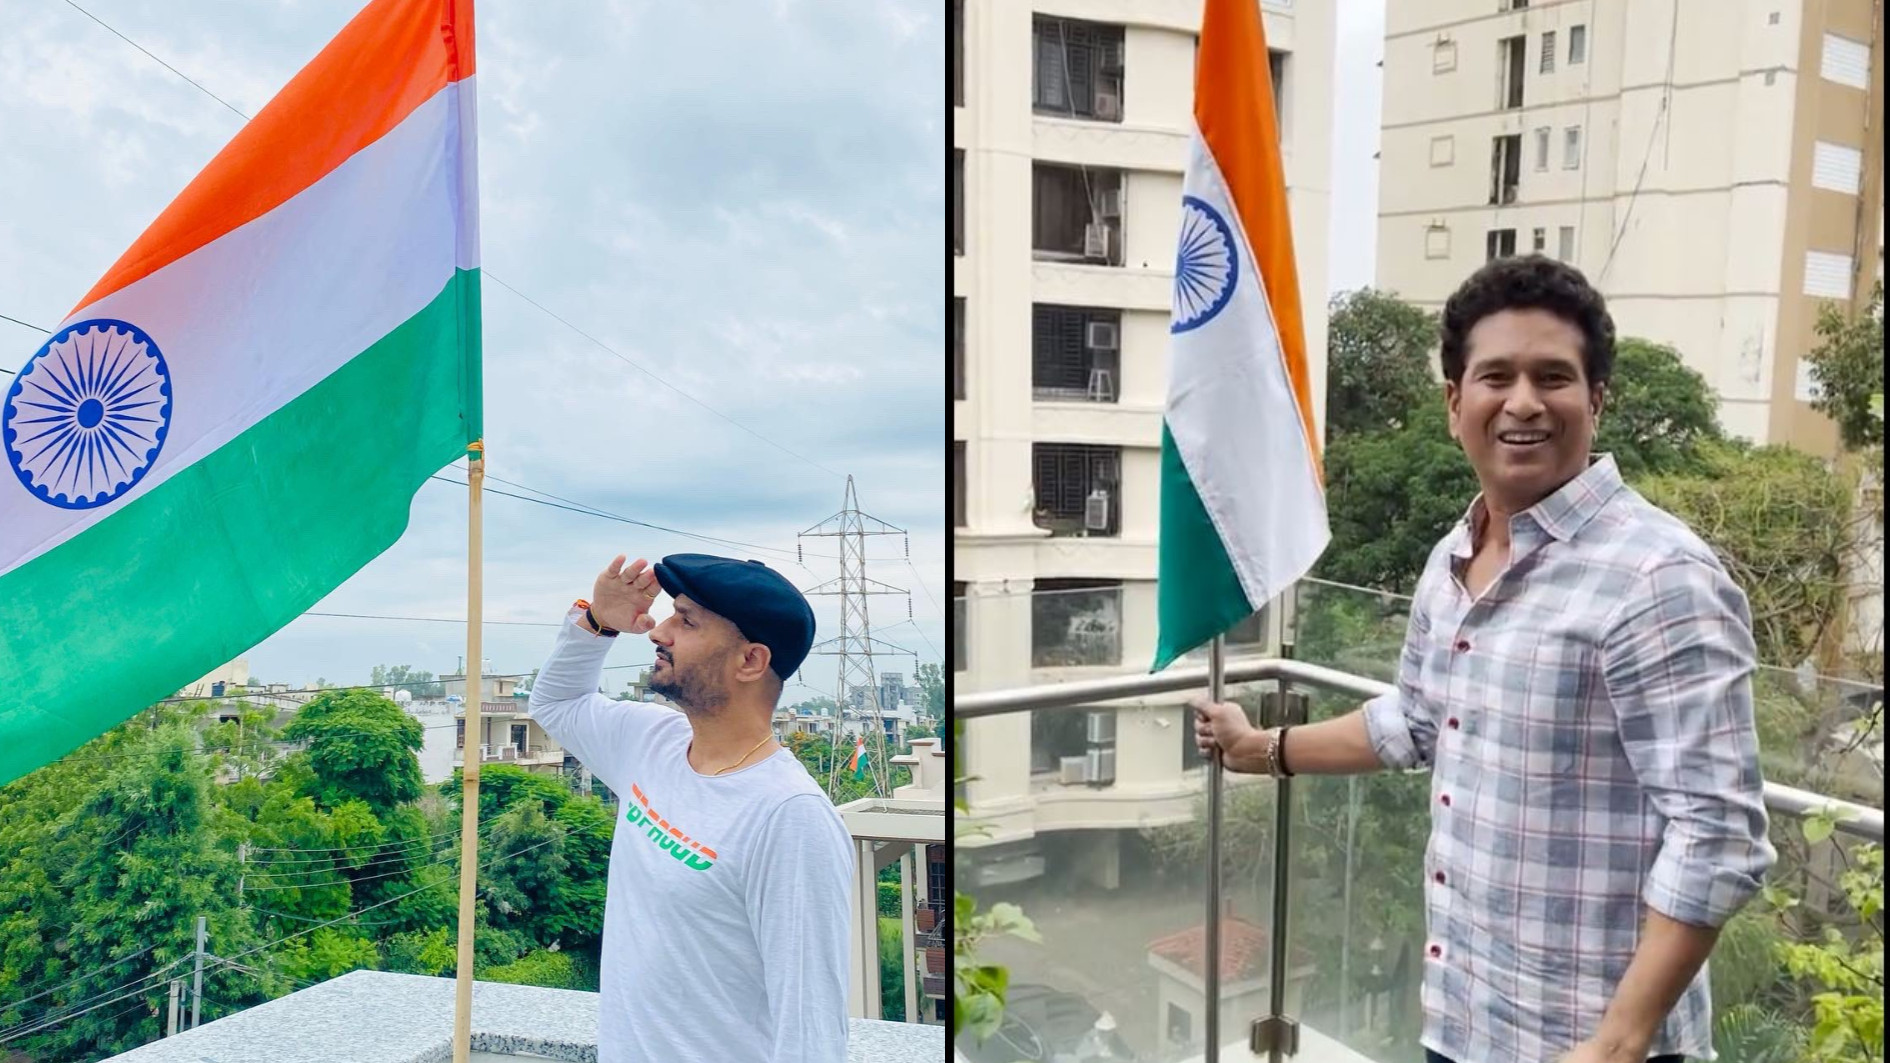 Indian cricket fraternity shares their celebration of India’s 75 years of Independence